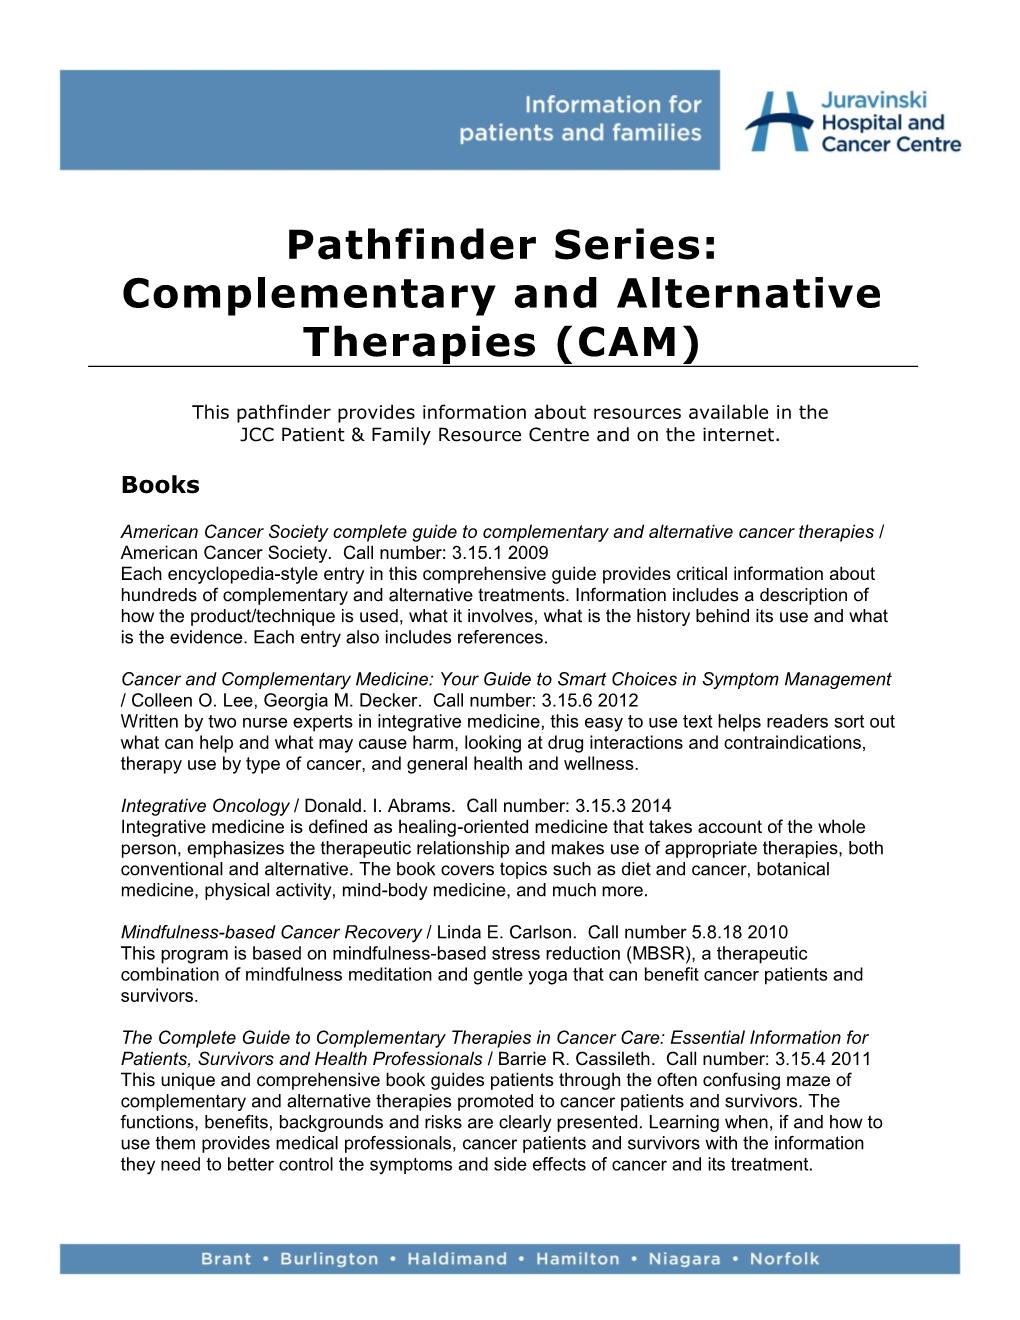 Complementary and Alternative Therapies (CAM)